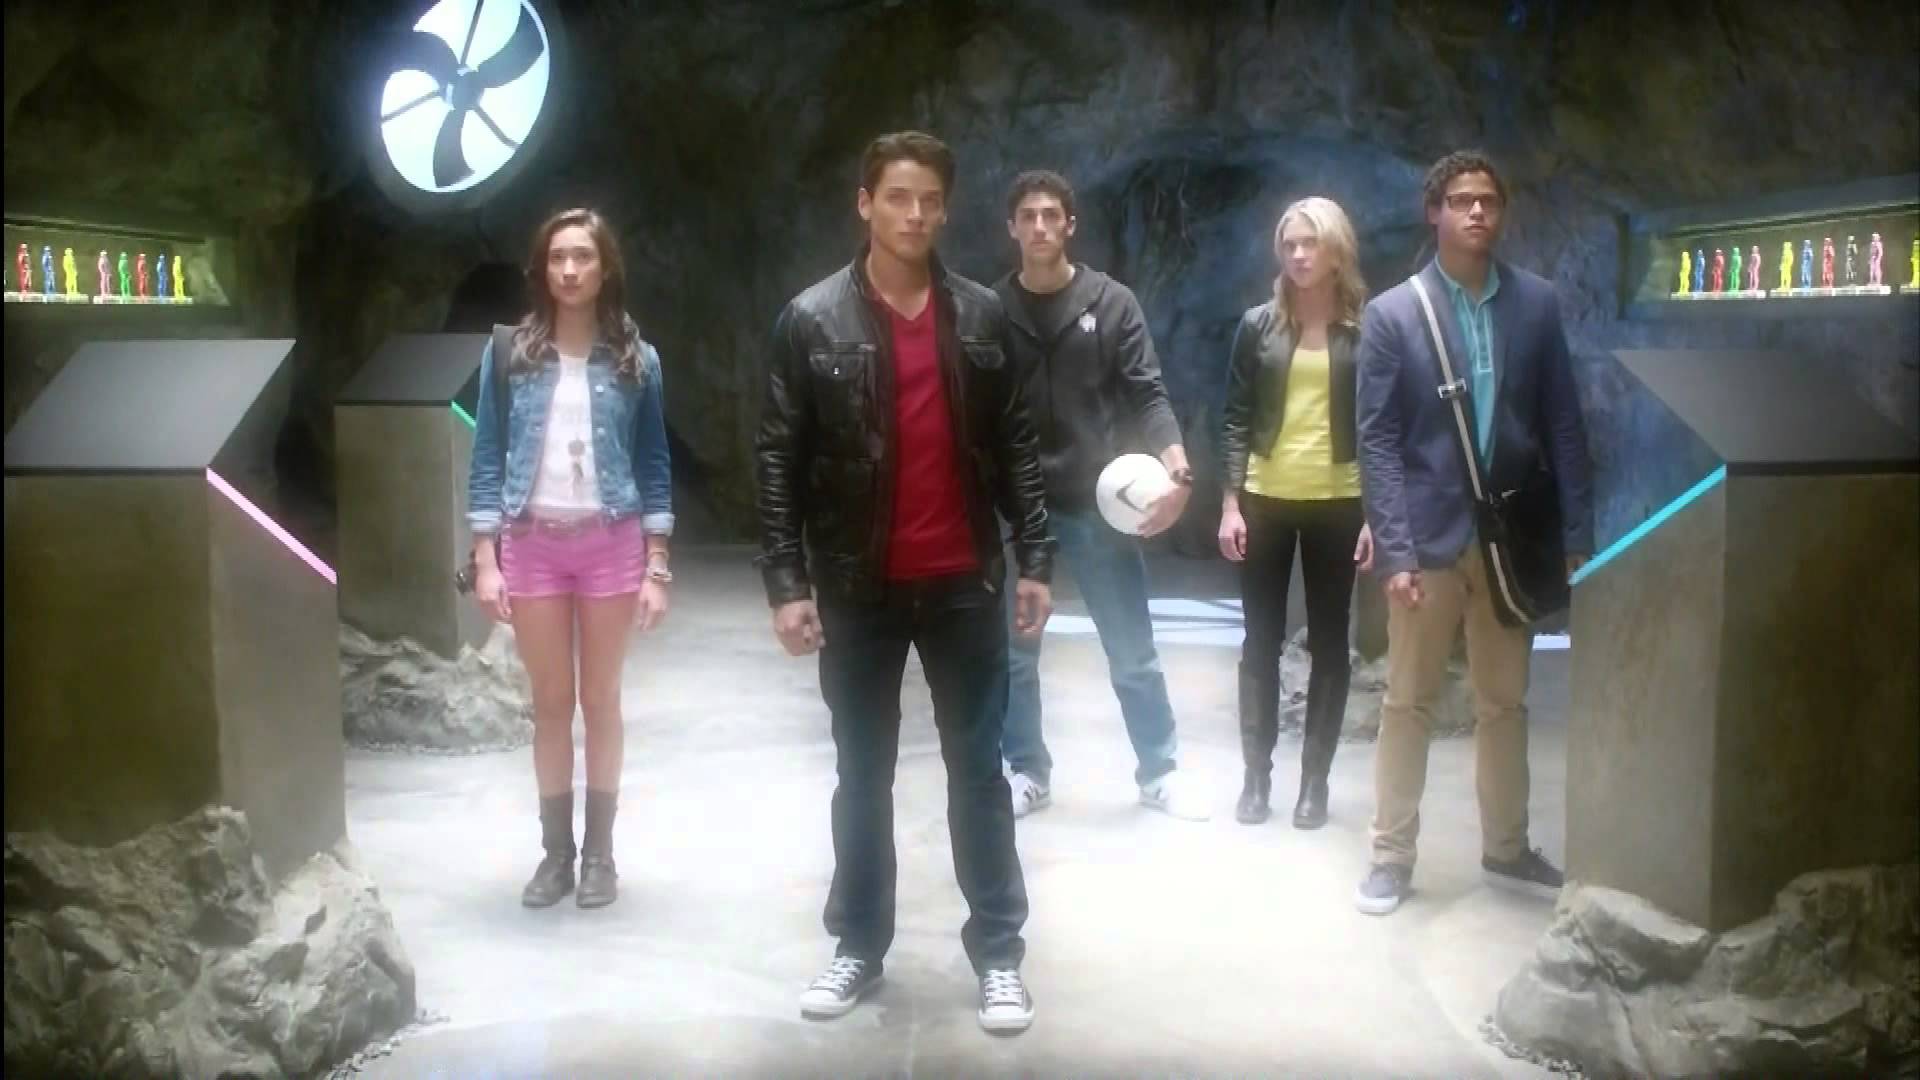 Christina Masterson as Emma Goodall and rest of main cast in 'Power Rangers Megaforce'